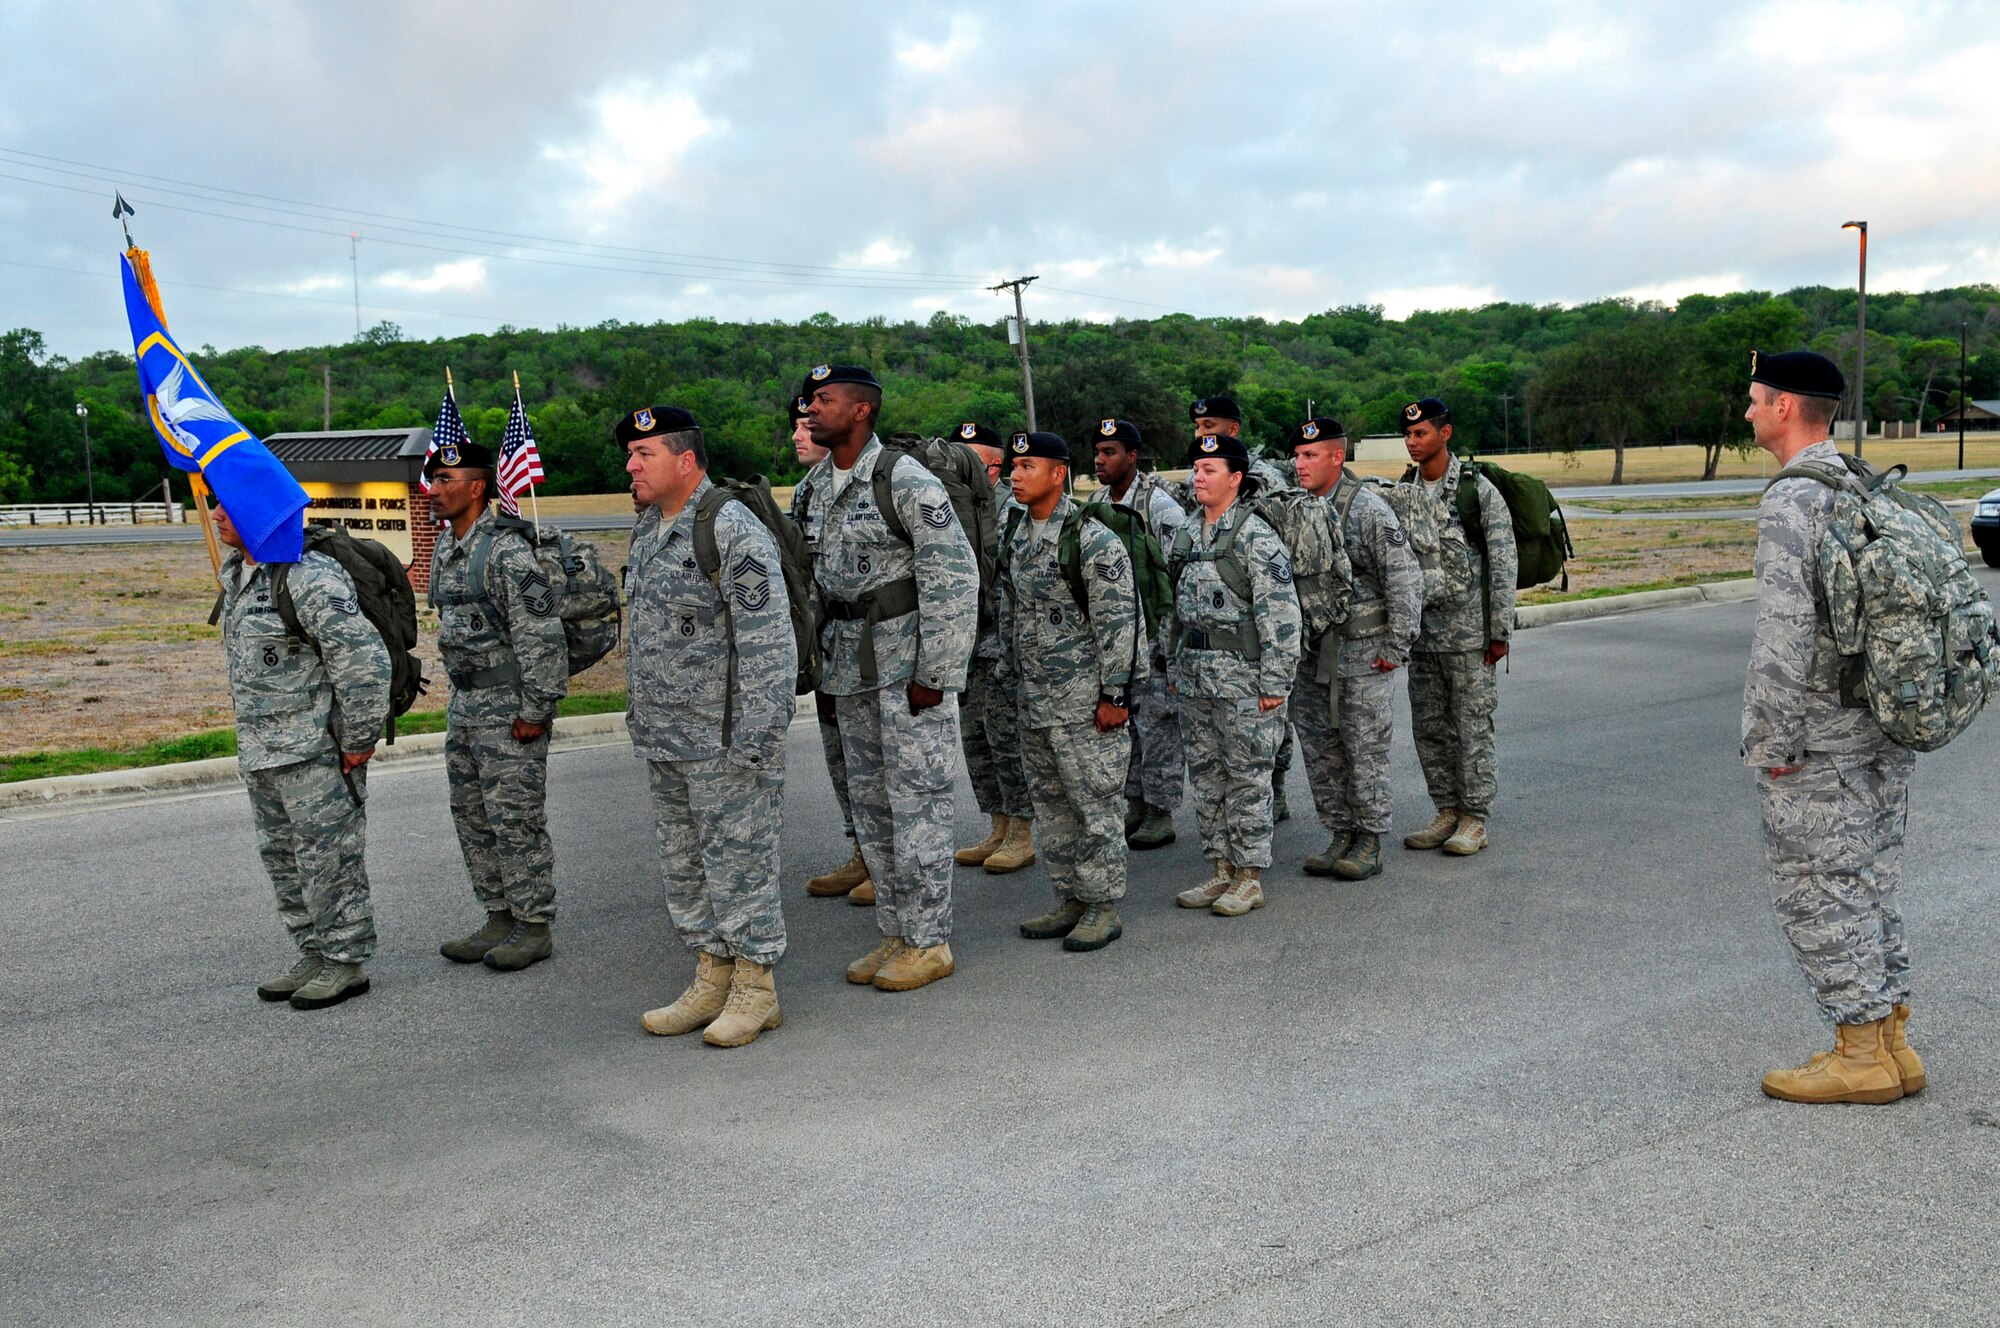 U.S. Air Force and Air National Guard Security Forces prepare to embark on "The Ruck March to Remember 9/11" from Lackland Air Force Base, Texas, July 12, 2011.
(Air National Guard photo by Senior Master Sgt. Miguel D. Arellano/Released)